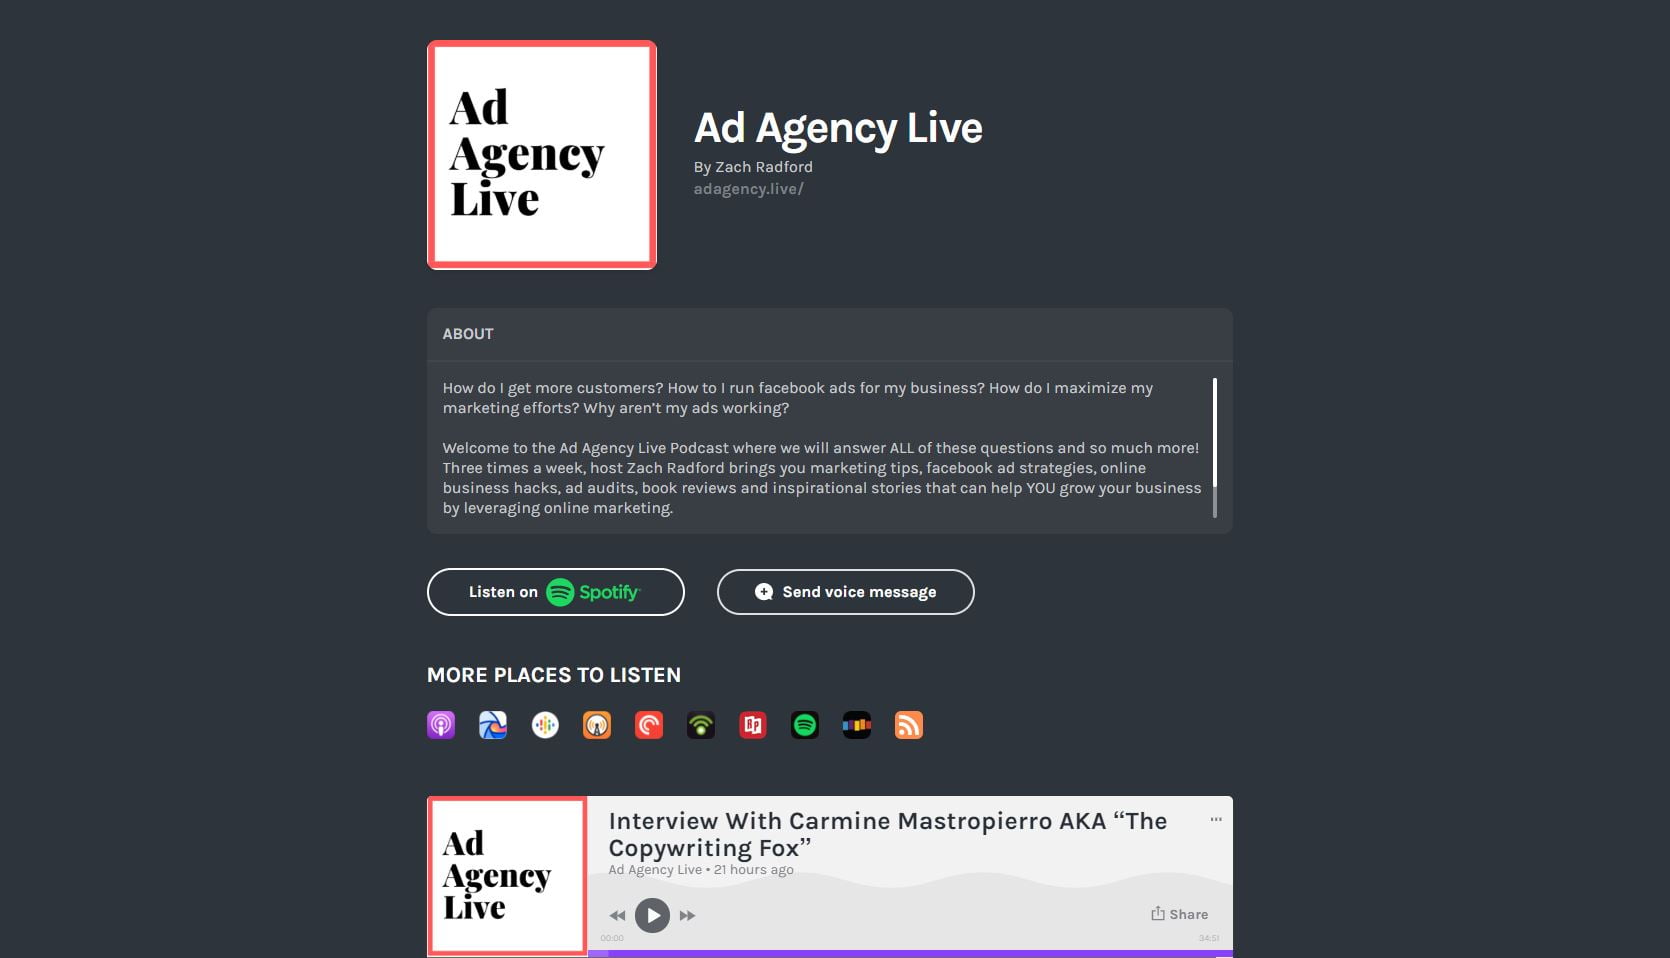 Ad Agency Live